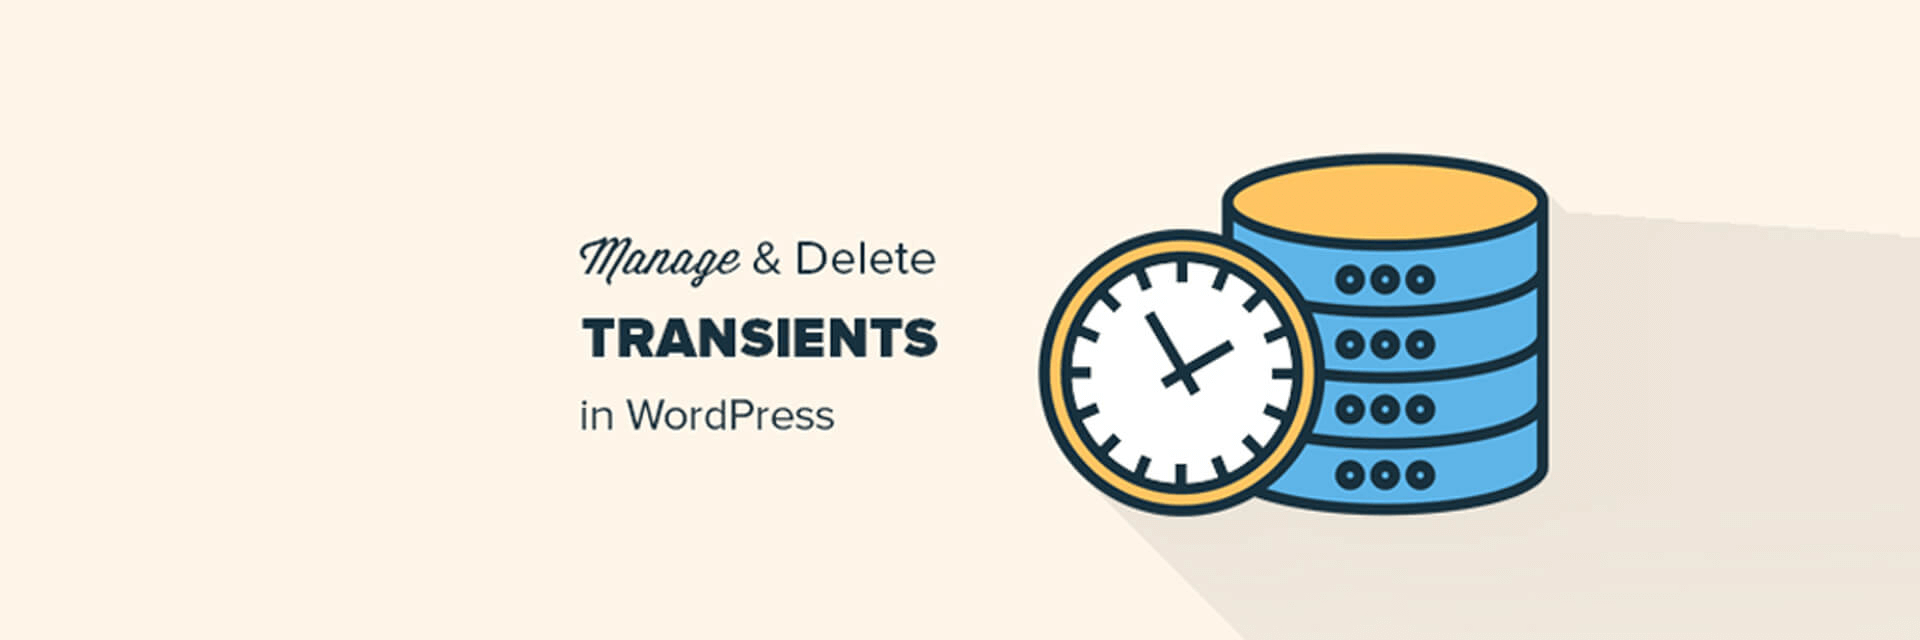 Manage and Delete Transients using TransientsManager